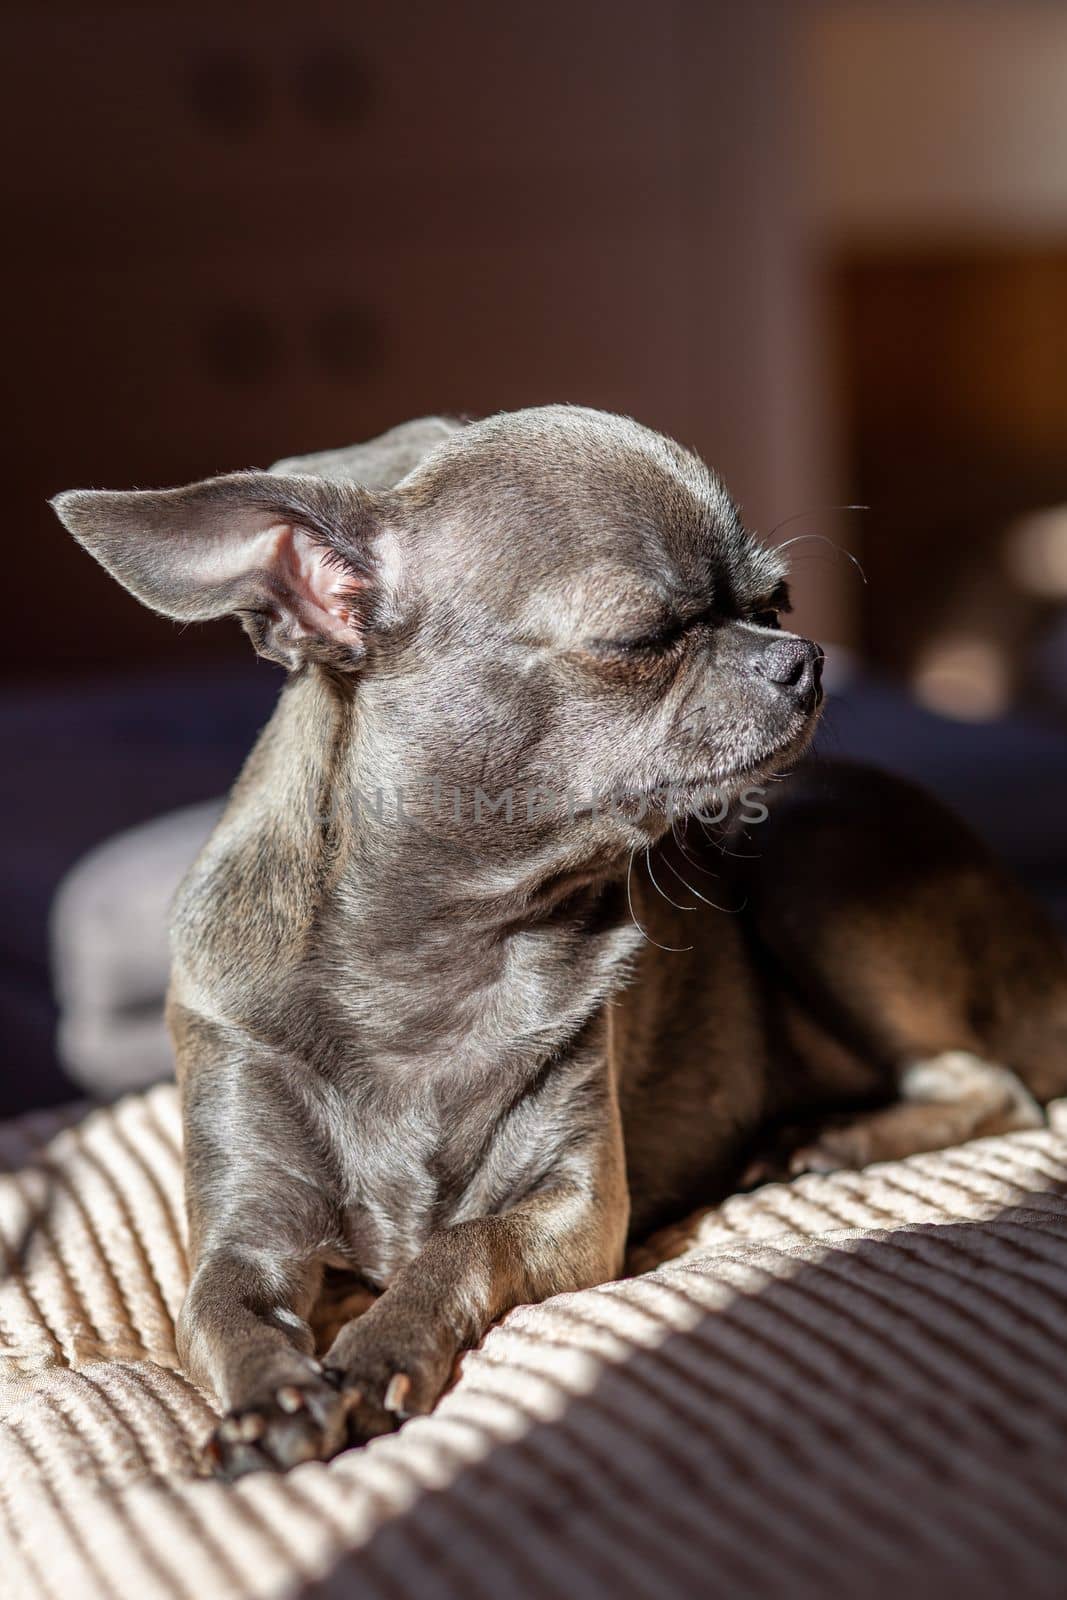 A close-up image shows a cute chihuahua puppy of a domestic mammal breed lying relaxing on a bed. Pets are resting, sleeping. A touching and emotional portrait. Dog ears, eyes and muzzles